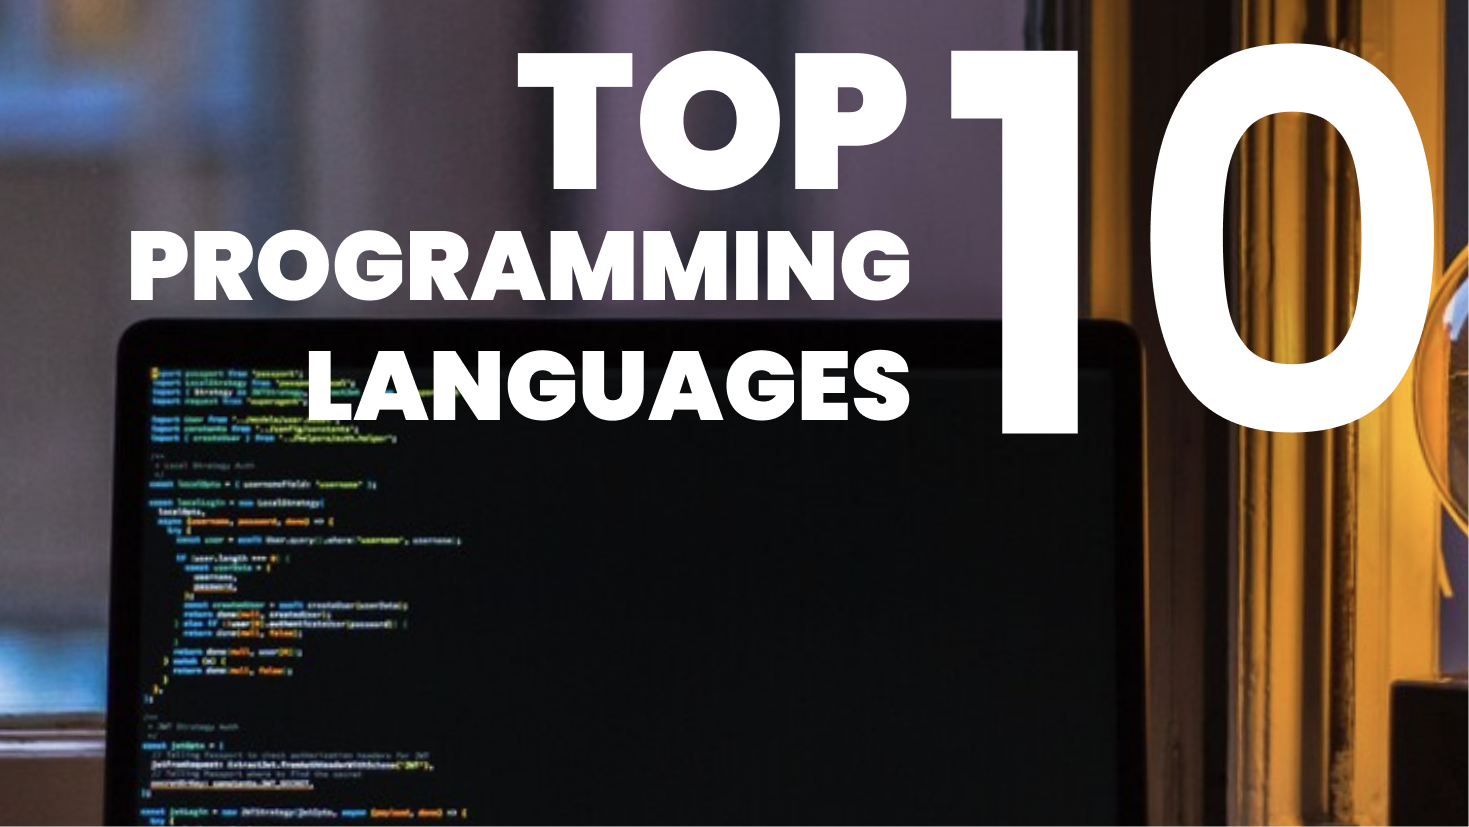 Top 10 programming languages for beginners